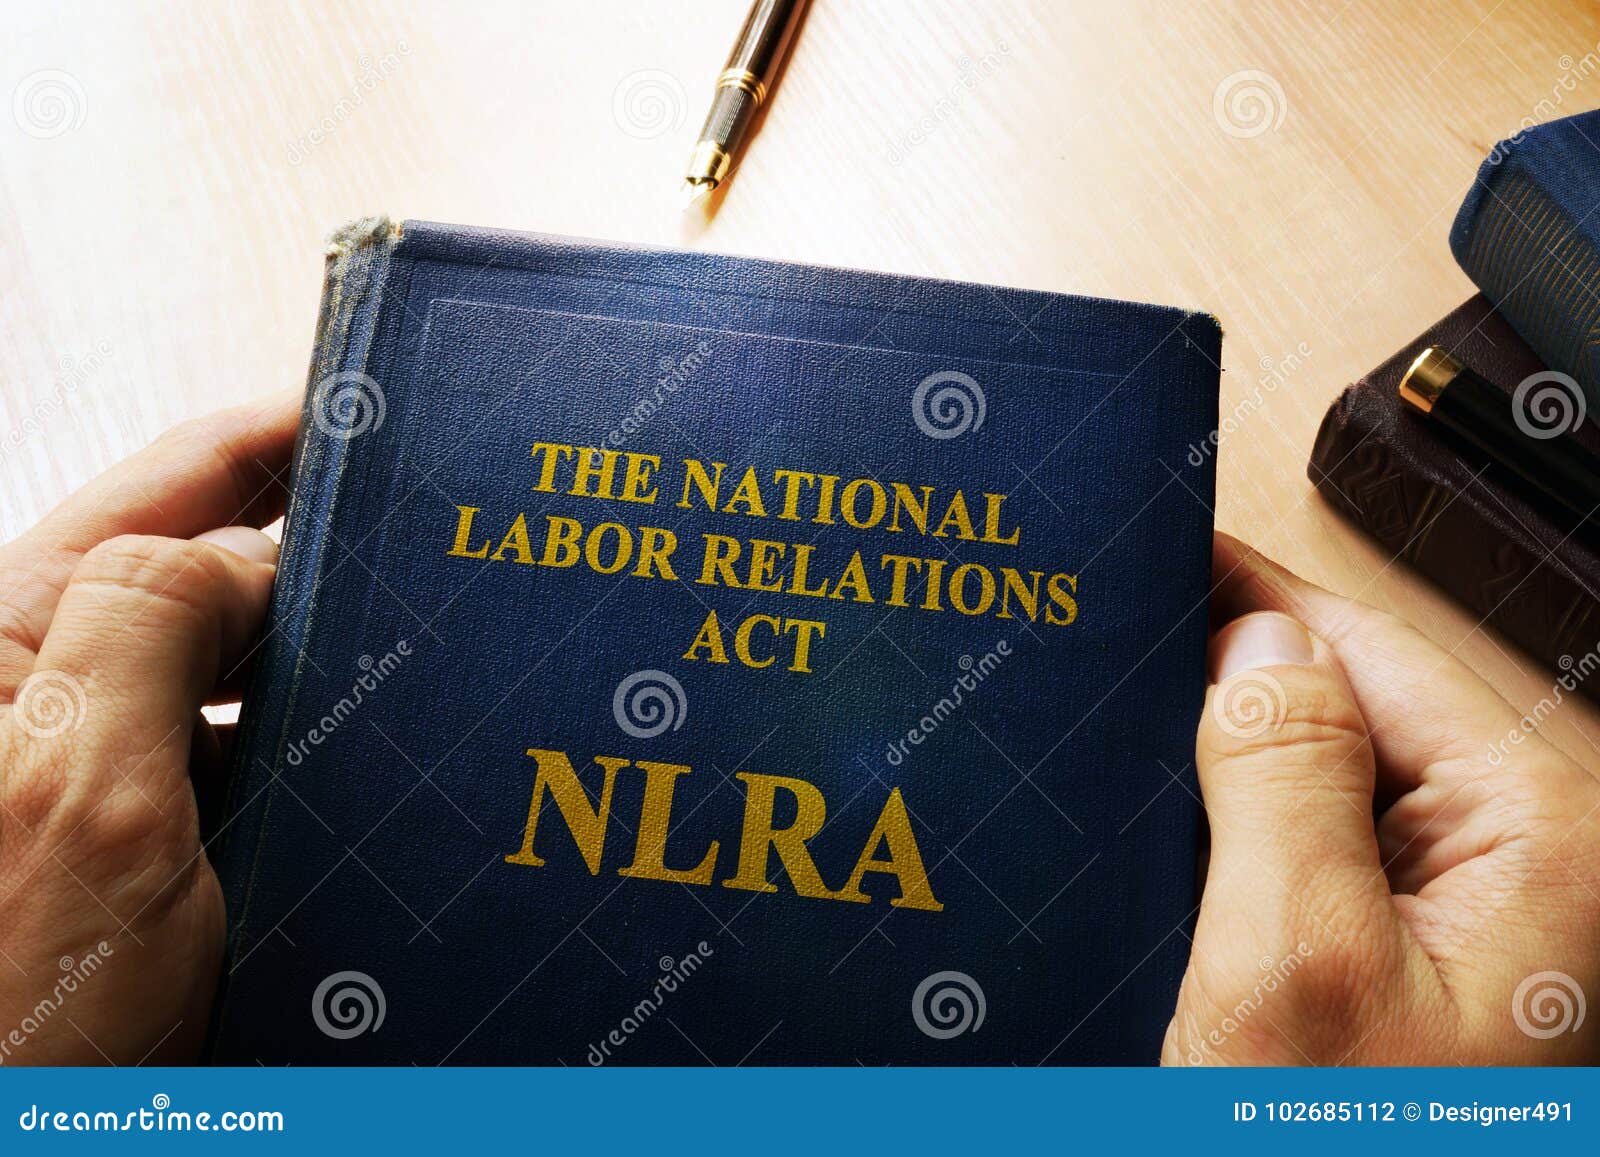 the national labor relations act nlra.